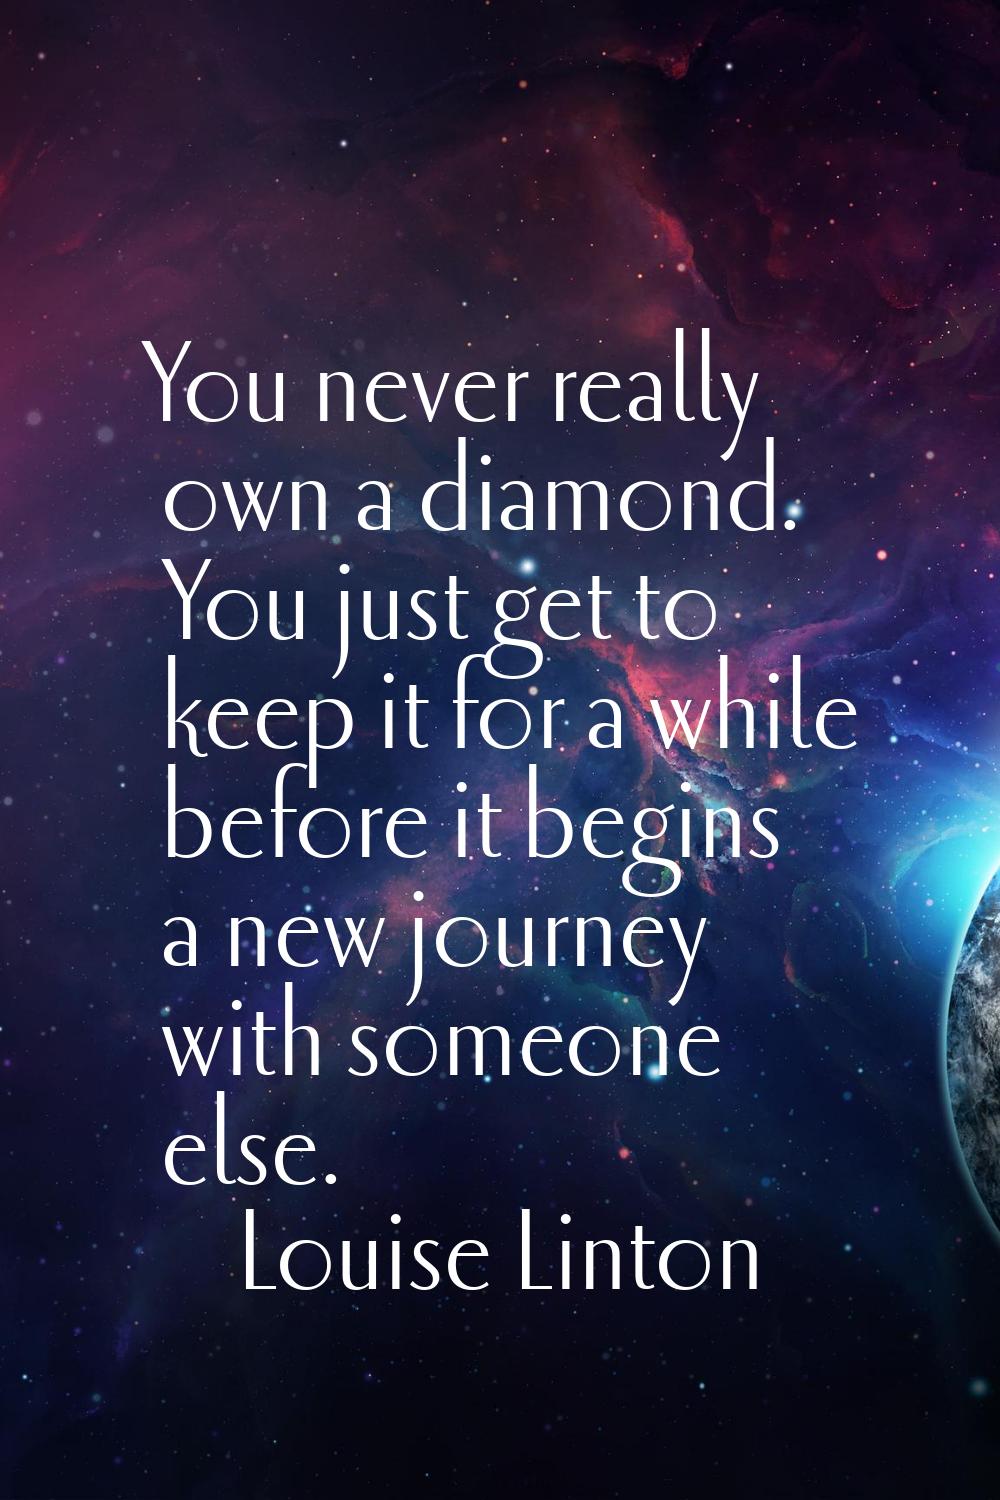 You never really own a diamond. You just get to keep it for a while before it begins a new journey 